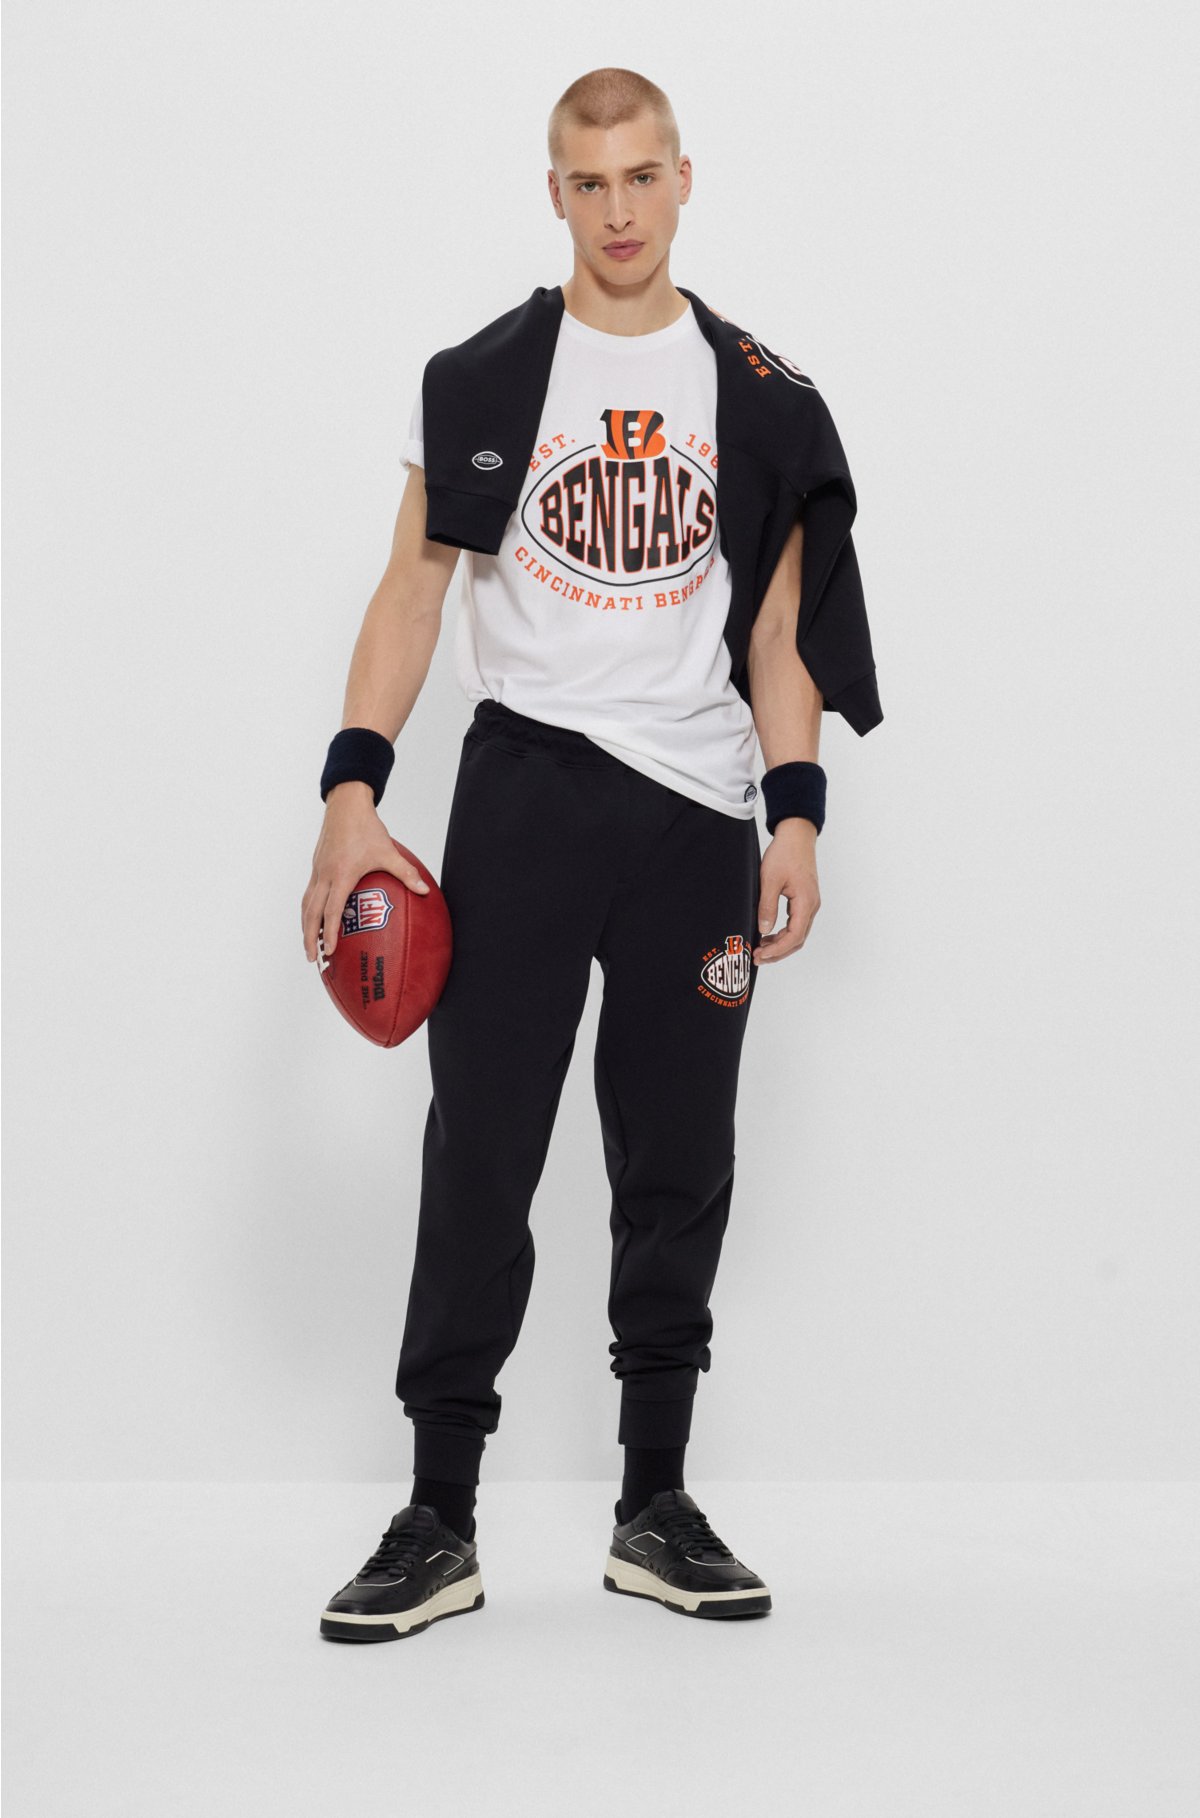  BOSS x NFL stretch-cotton T-shirt with collaborative branding, Bengals